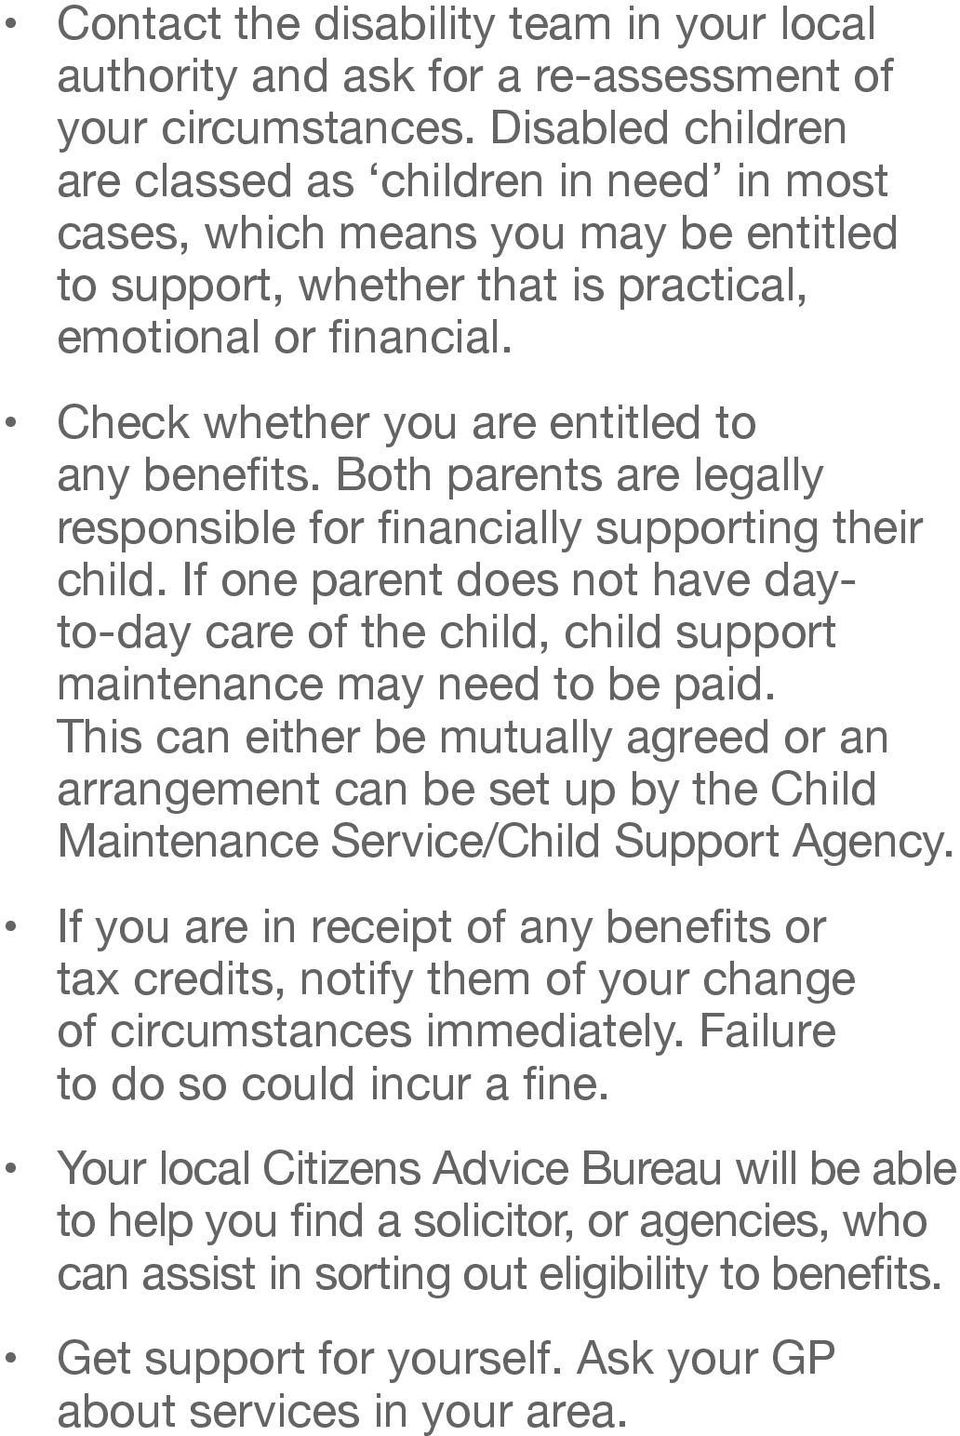 Check whether you are entitled to any benefits. Both parents are legally responsible for financially supporting their child.